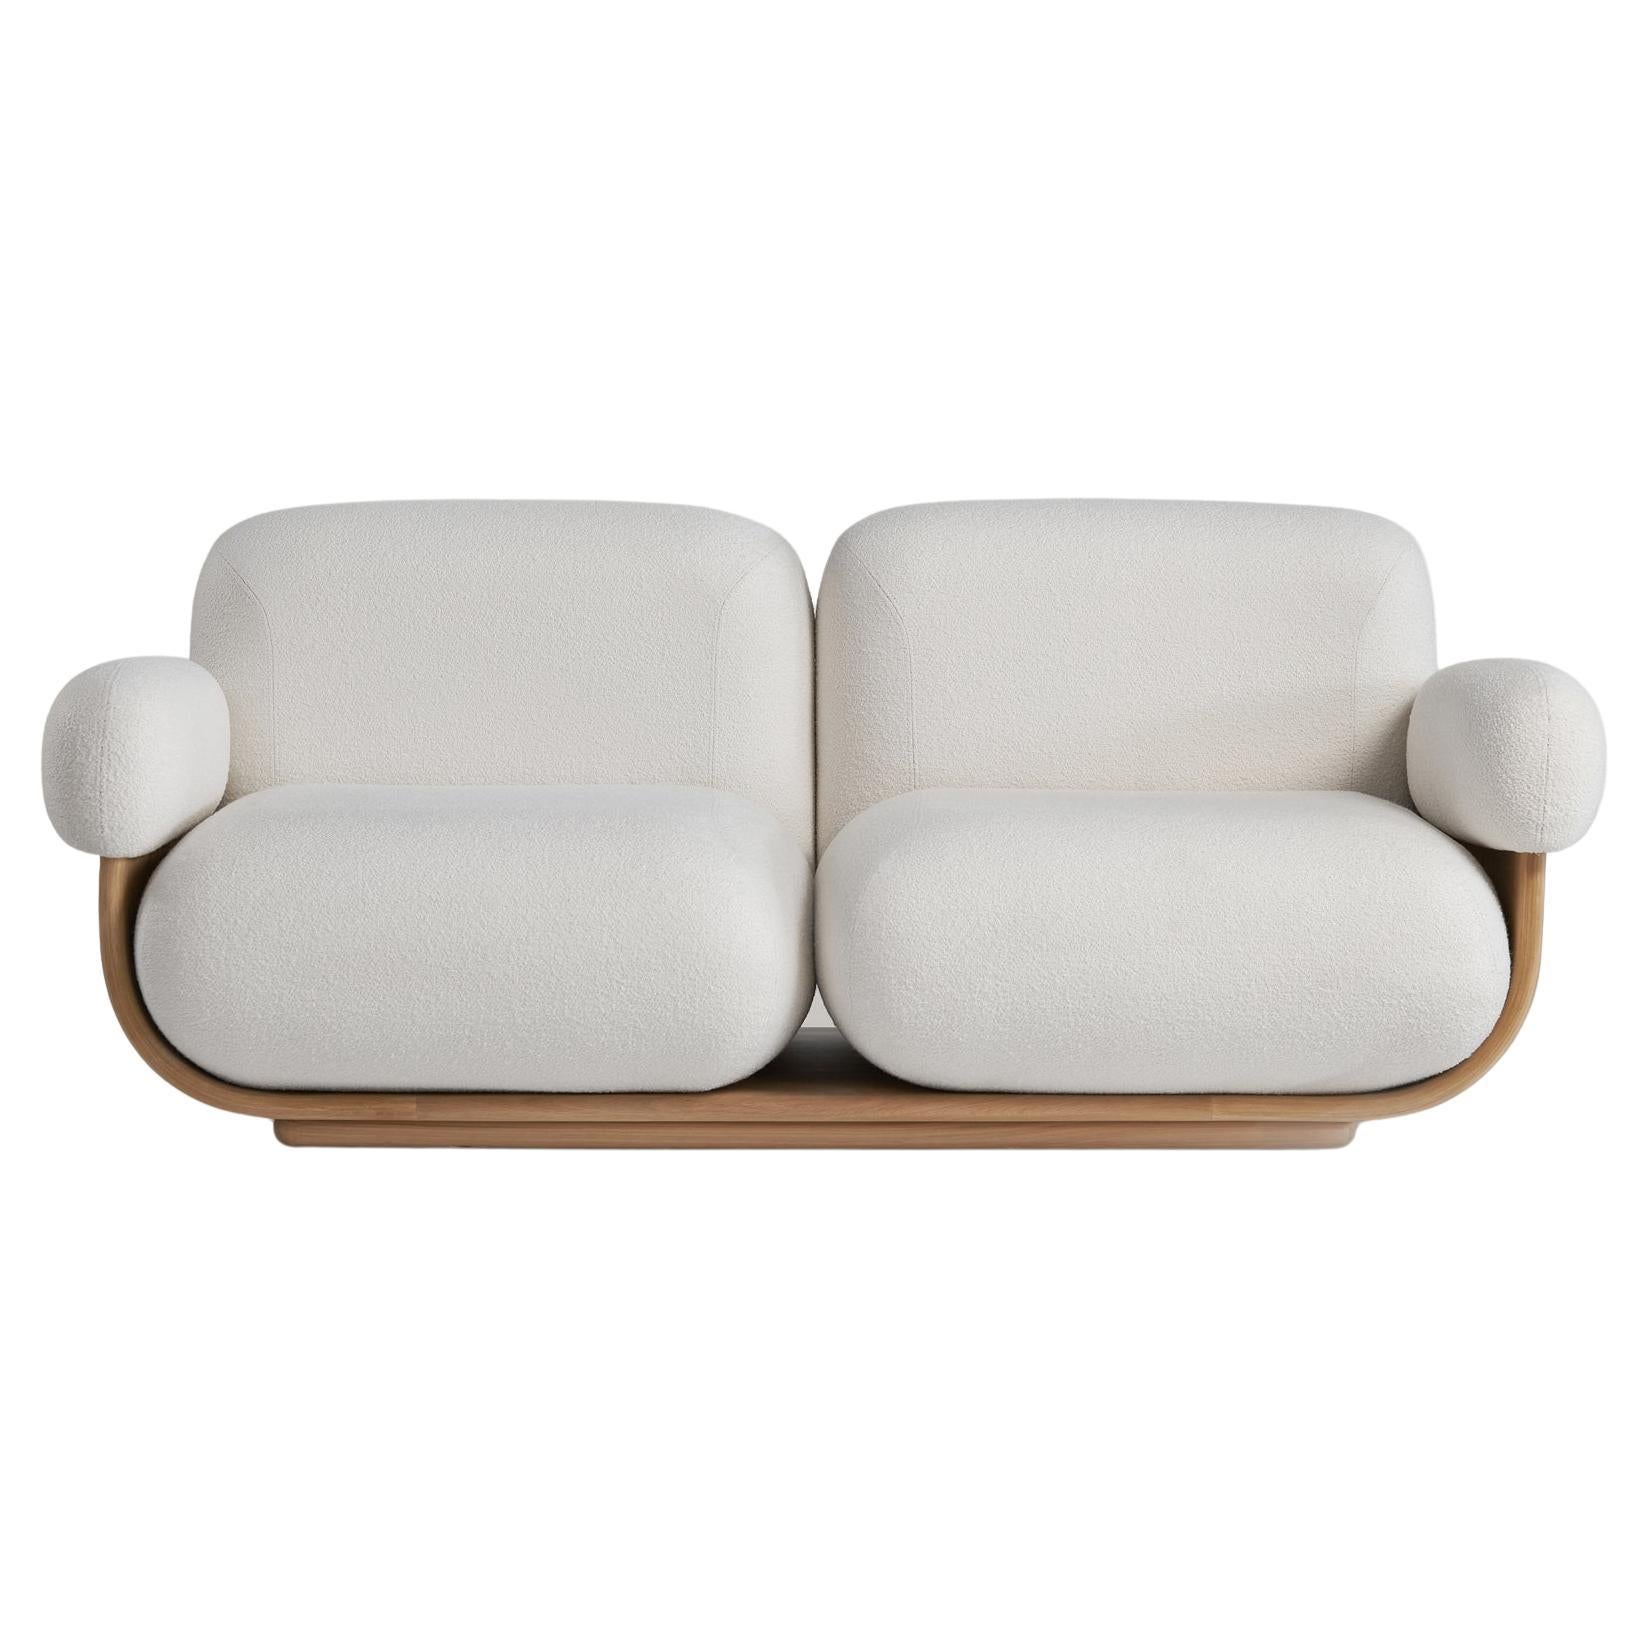 Cannoli Sofa by Studio Phat x Arbore 'Bent Hardwood Structure' For Sale